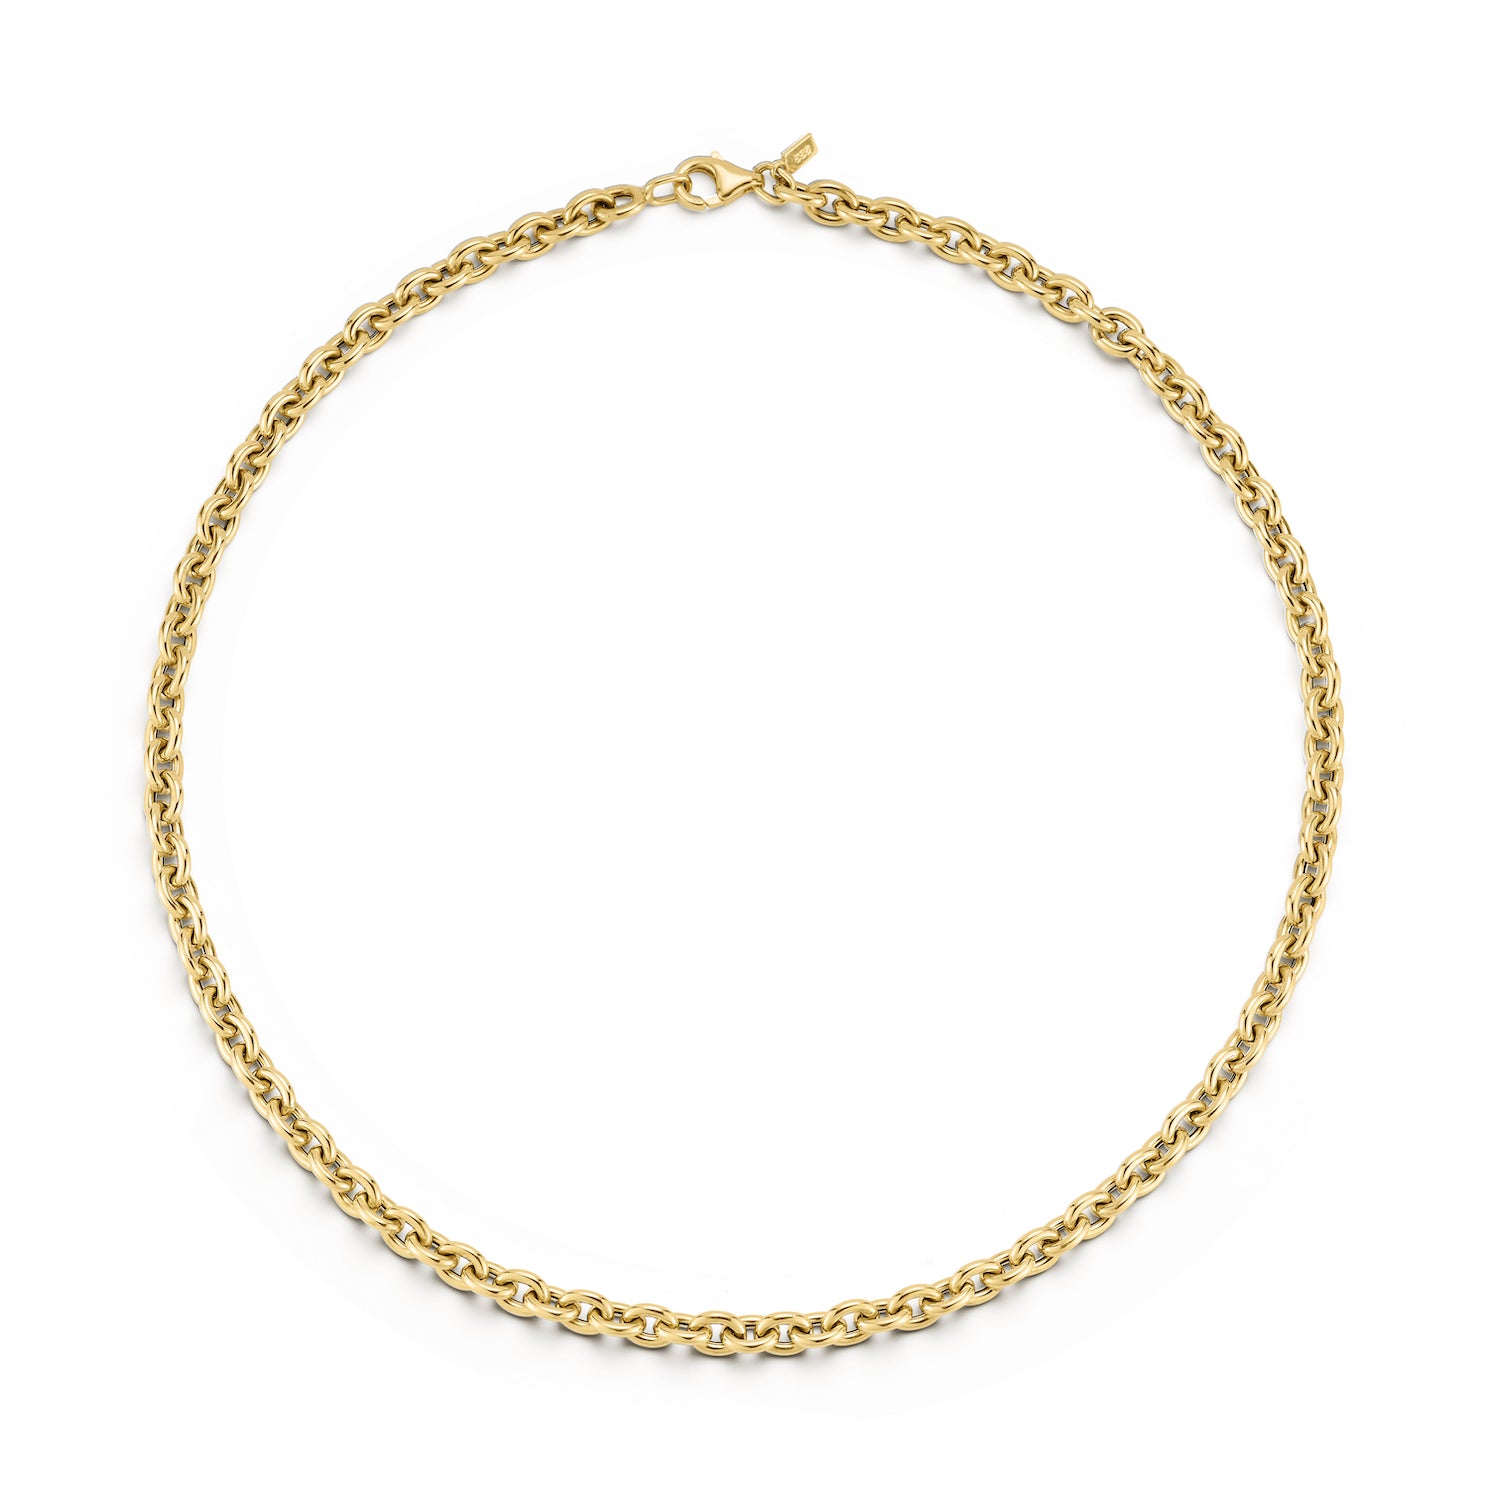 Sienna Chain Necklace in 14k yellow gold